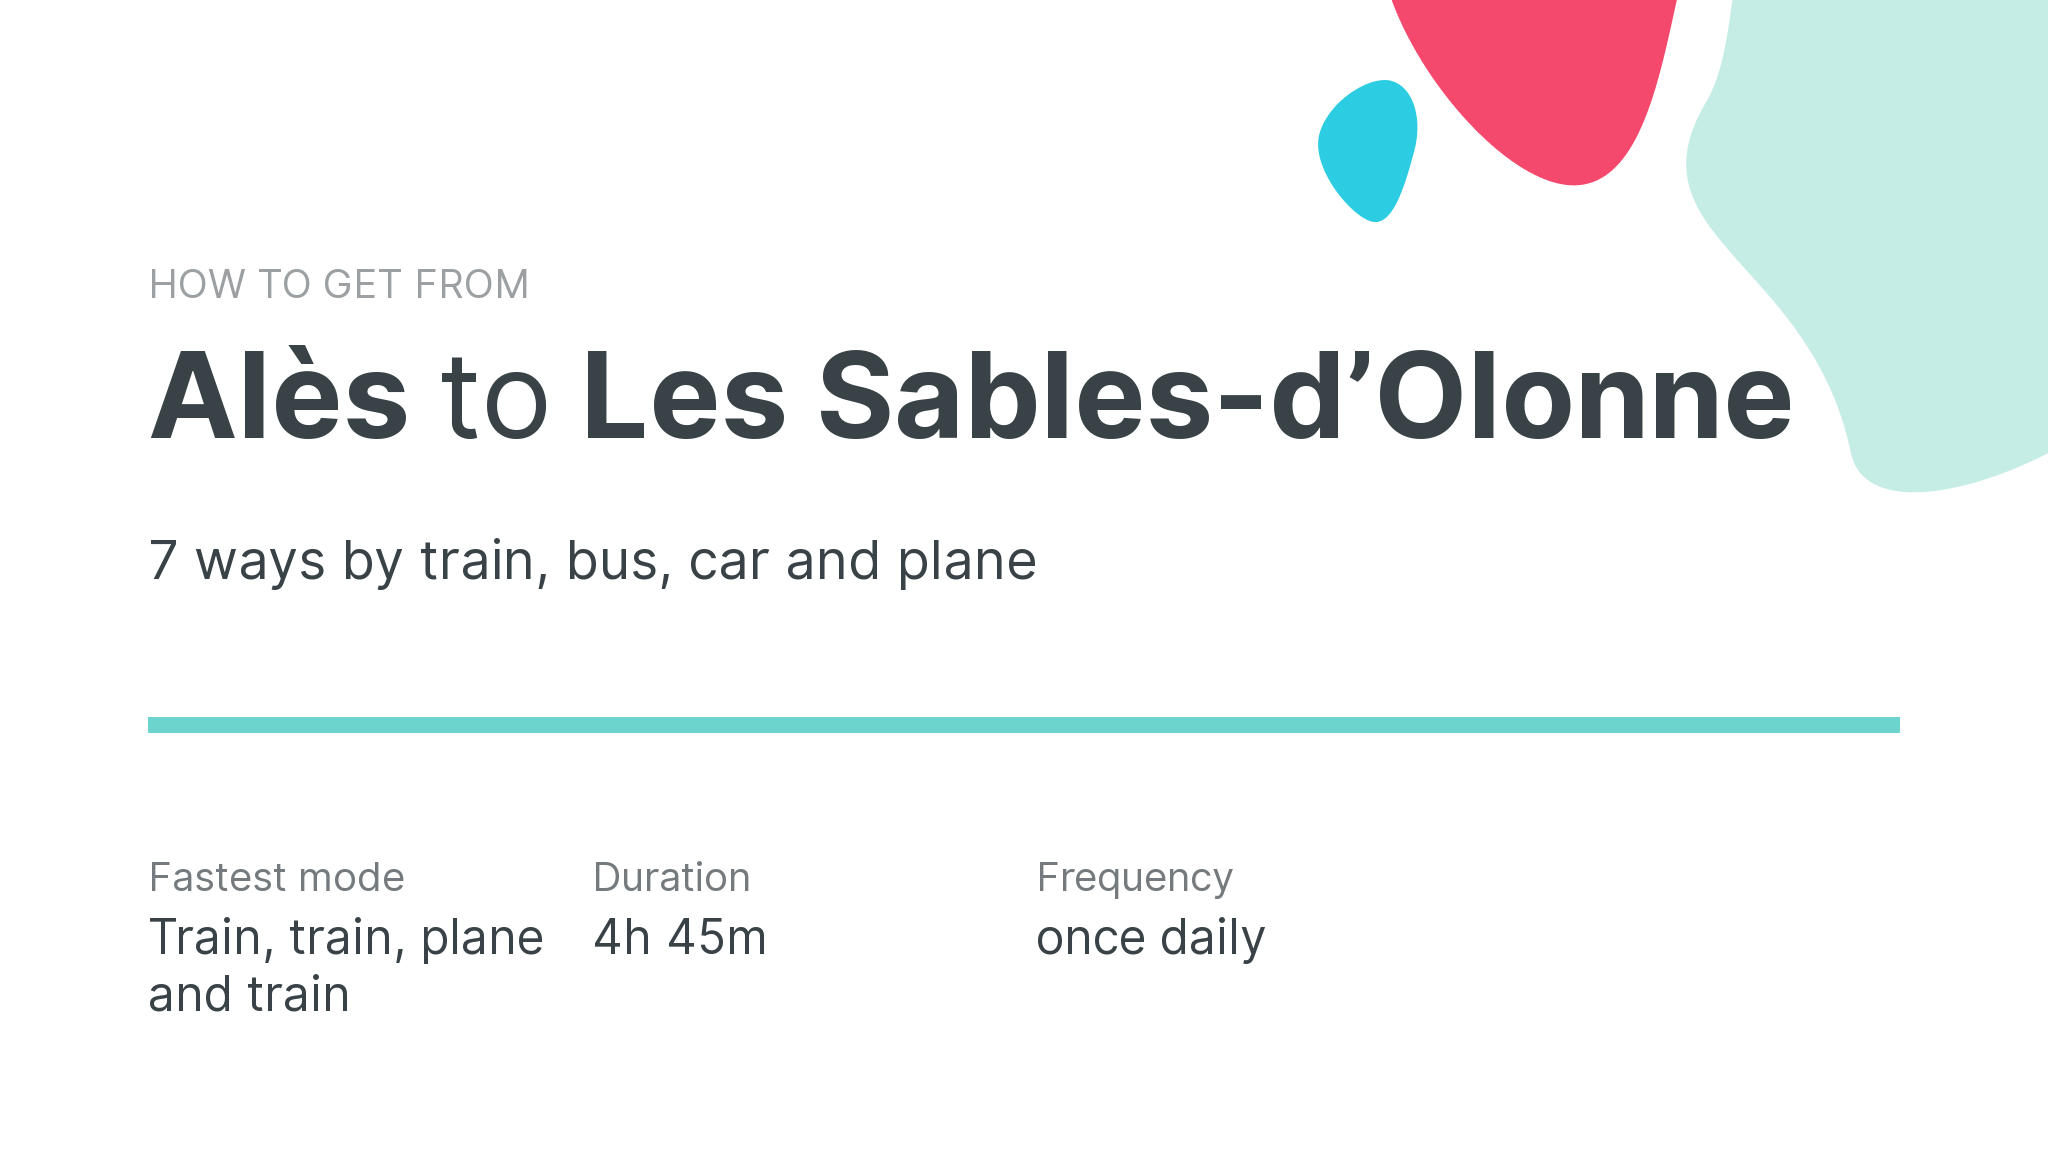 How do I get from Alès to Les Sables-dʼOlonne